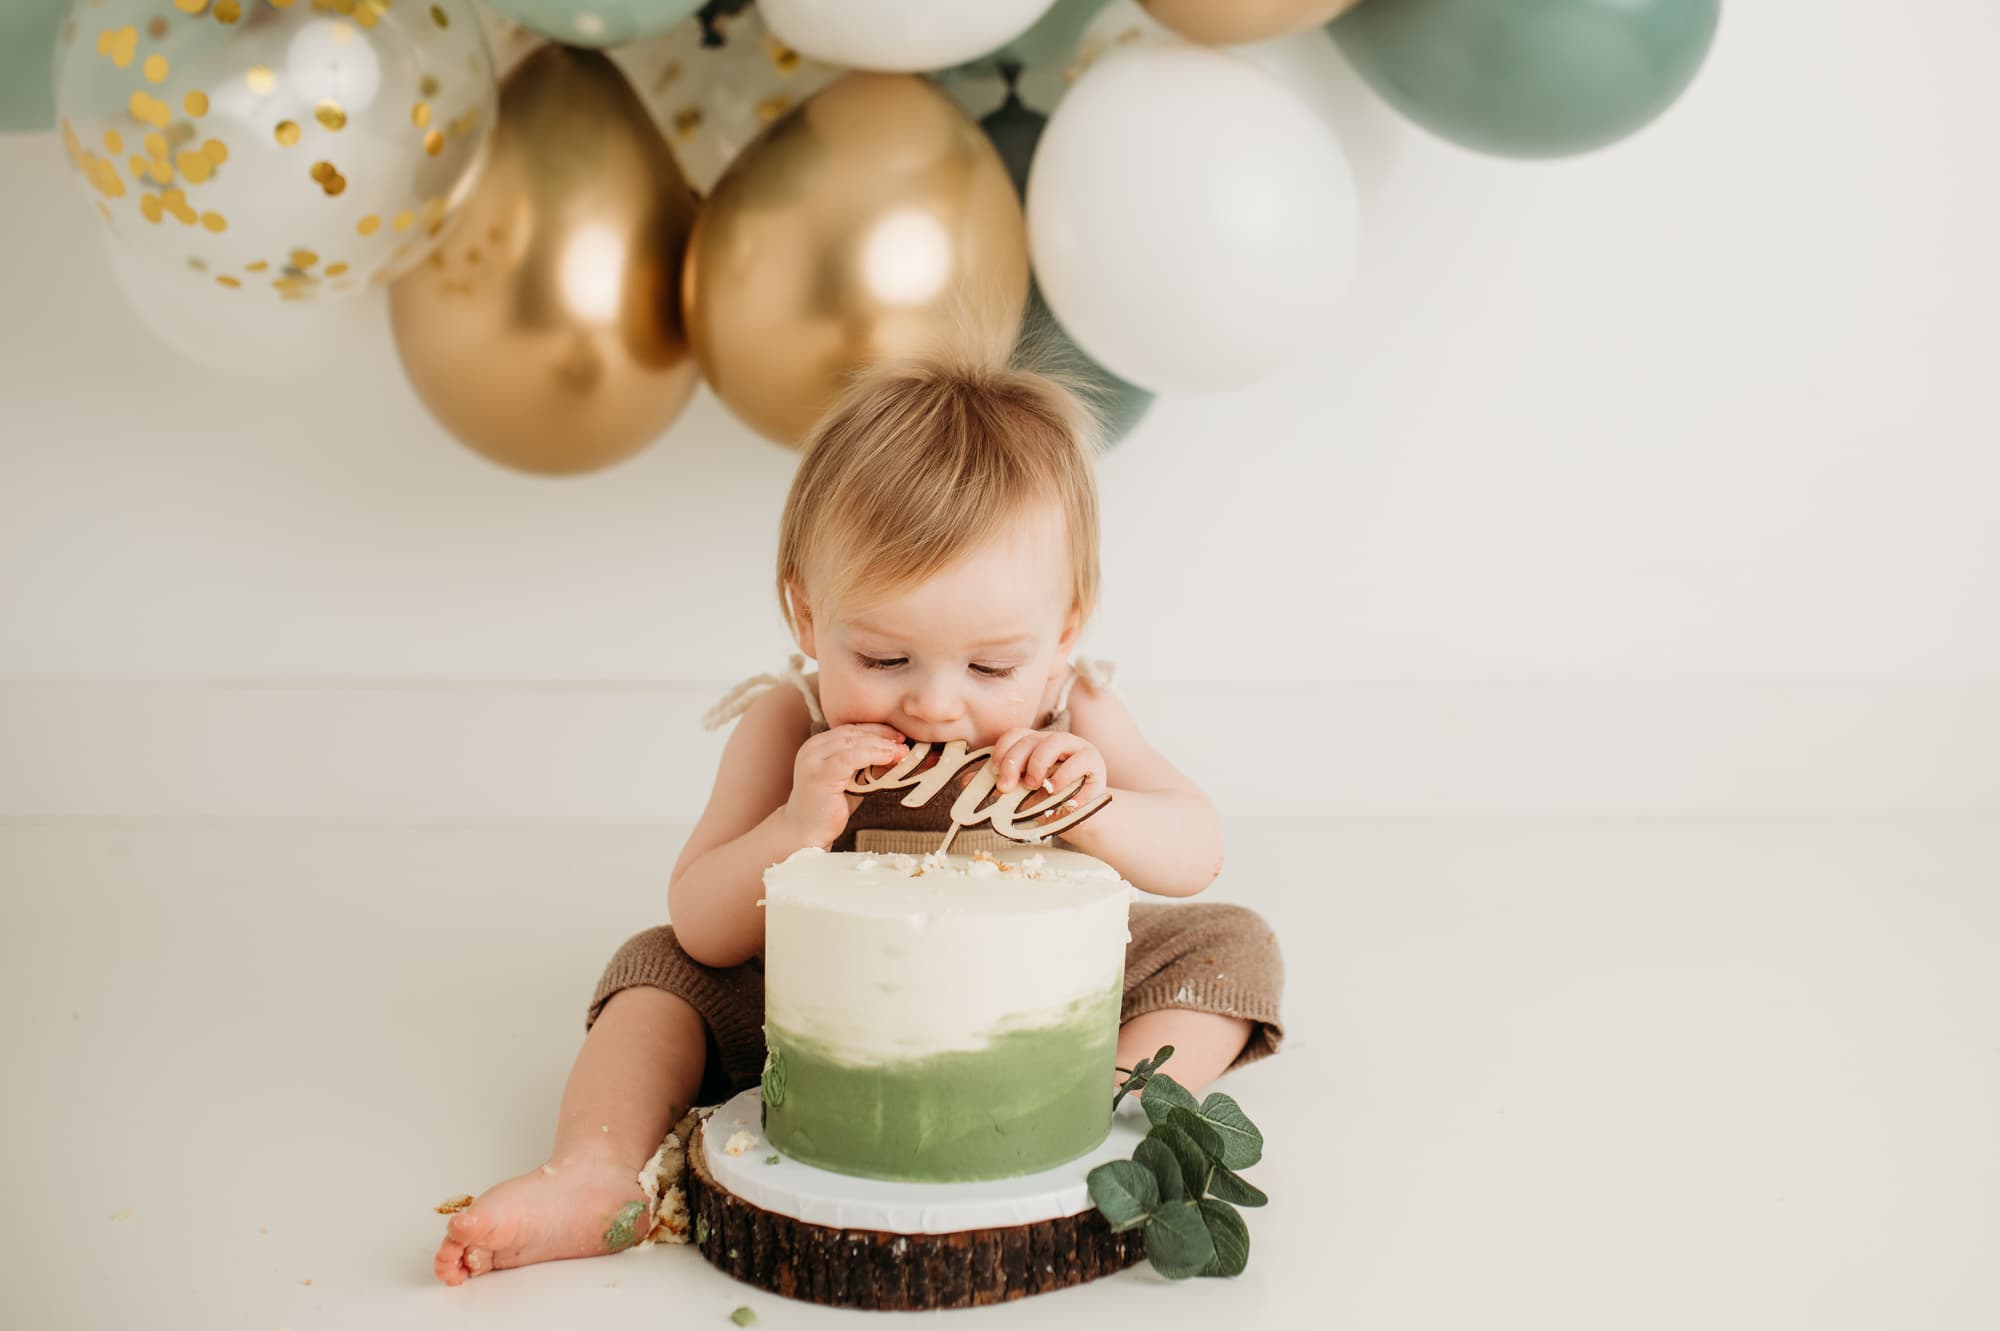 Boy eats whole cake in front of a green, gold and white balloon garland.